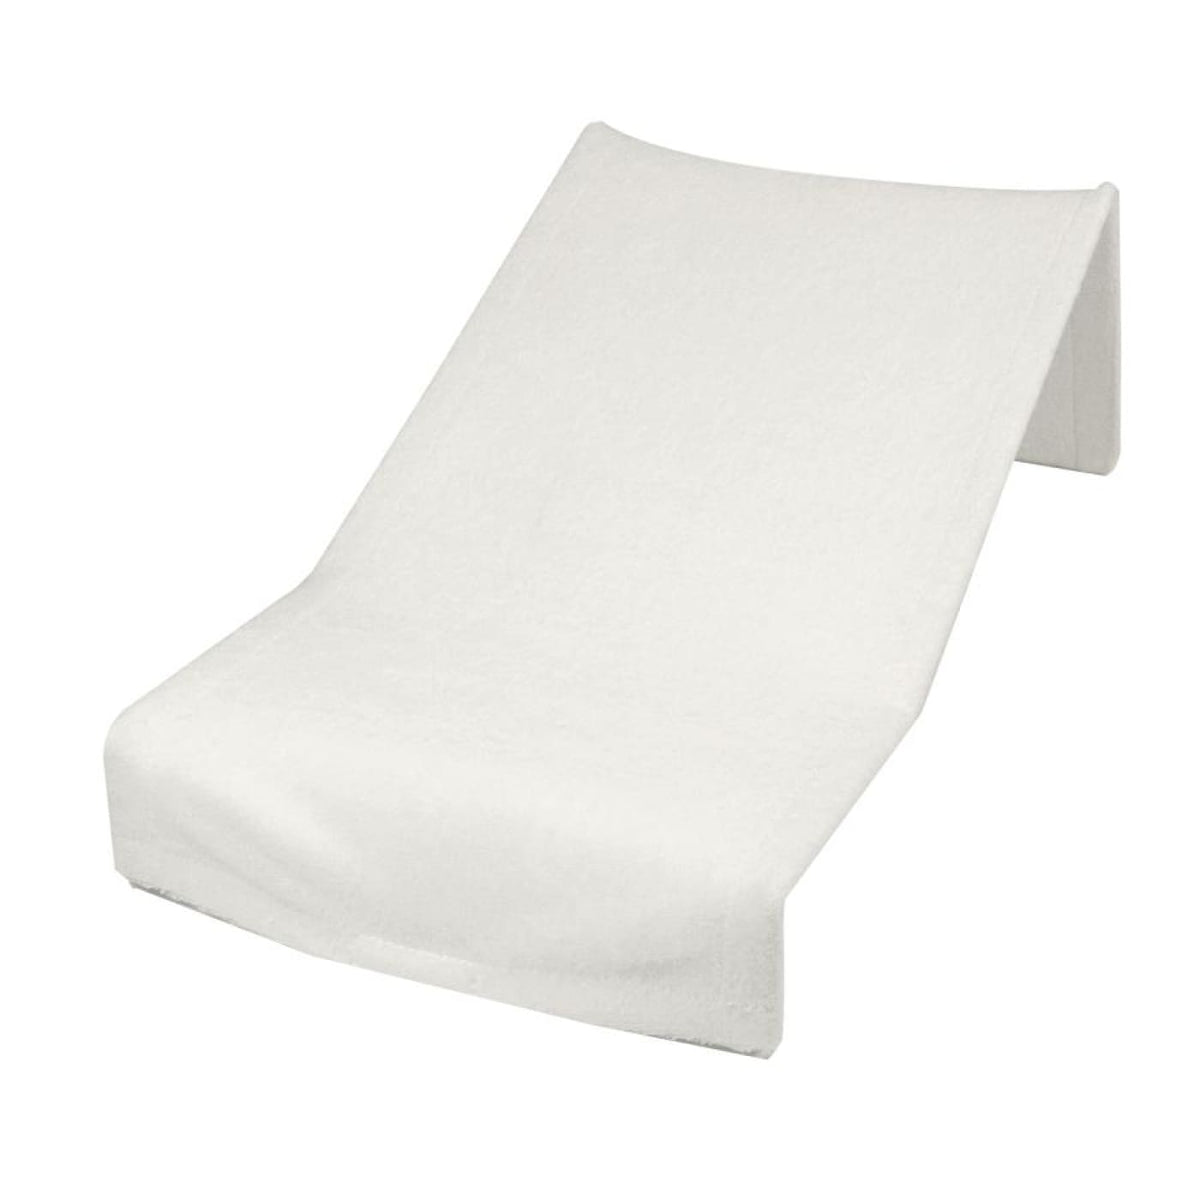 Babyhood Bath Support Towelling - White - BATHTIME &amp; CHANGING - BATH SUPPORTS/SEATS